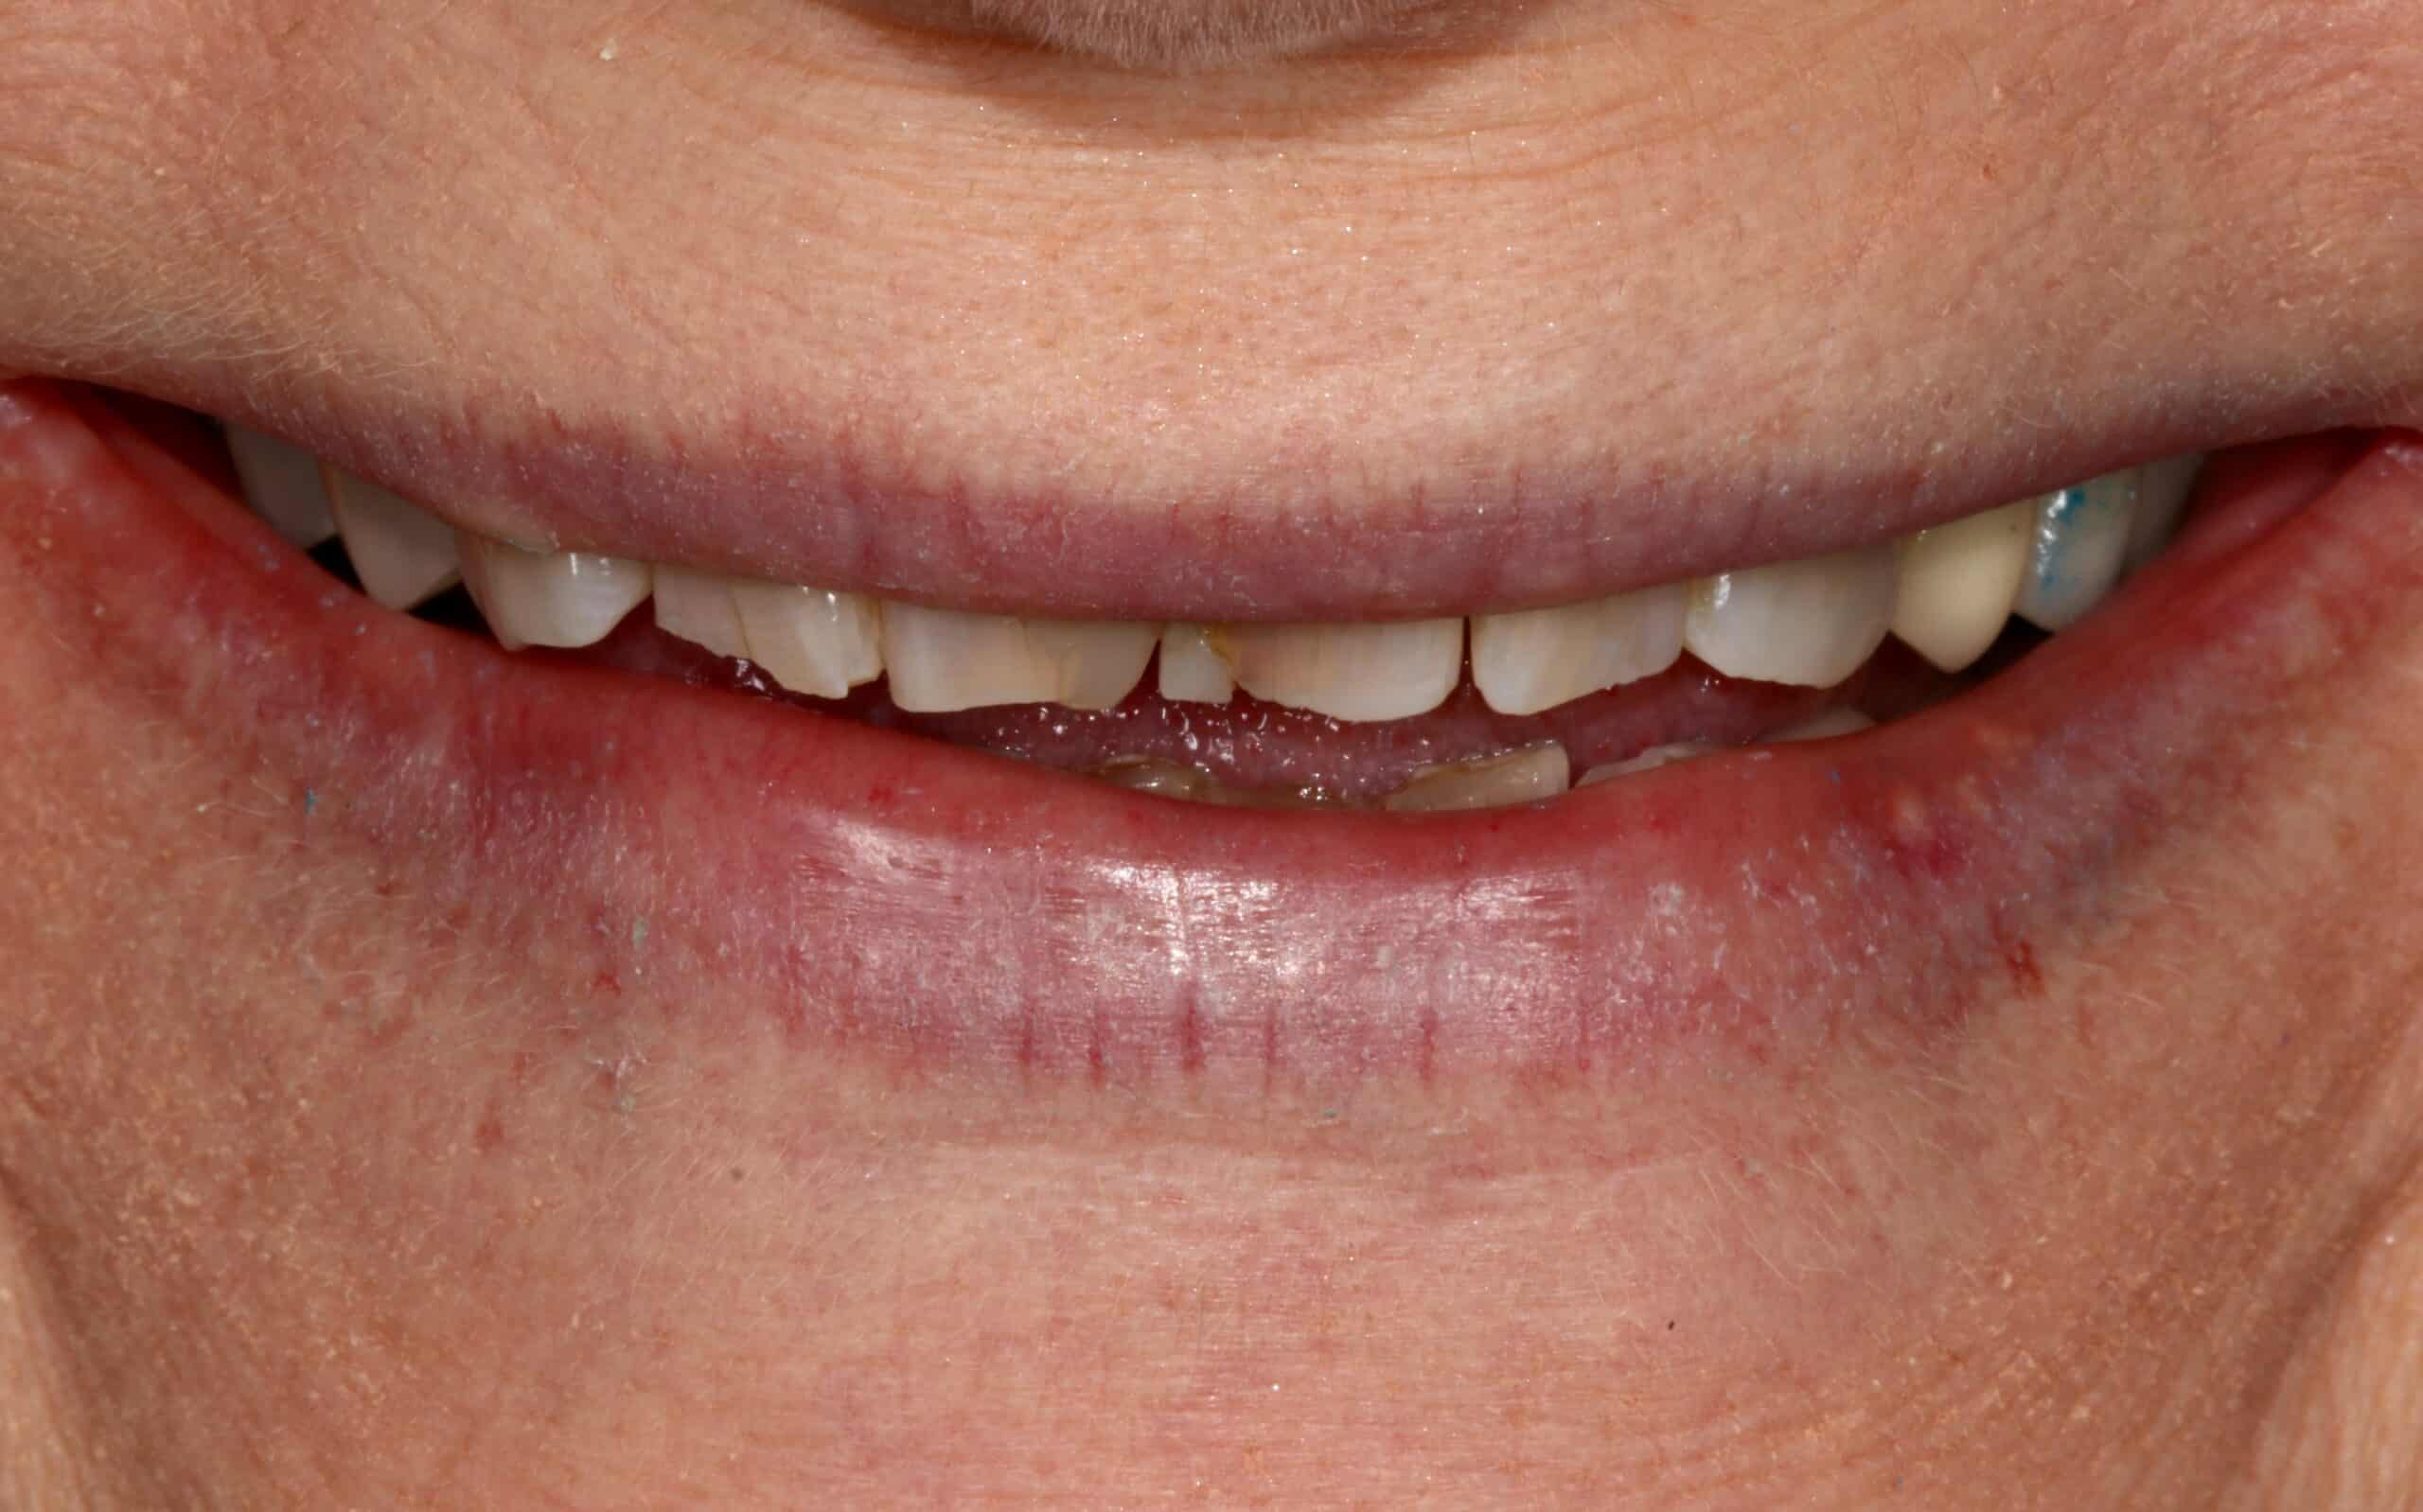 A close-up photo of a patient’s discolored, worn down teeth